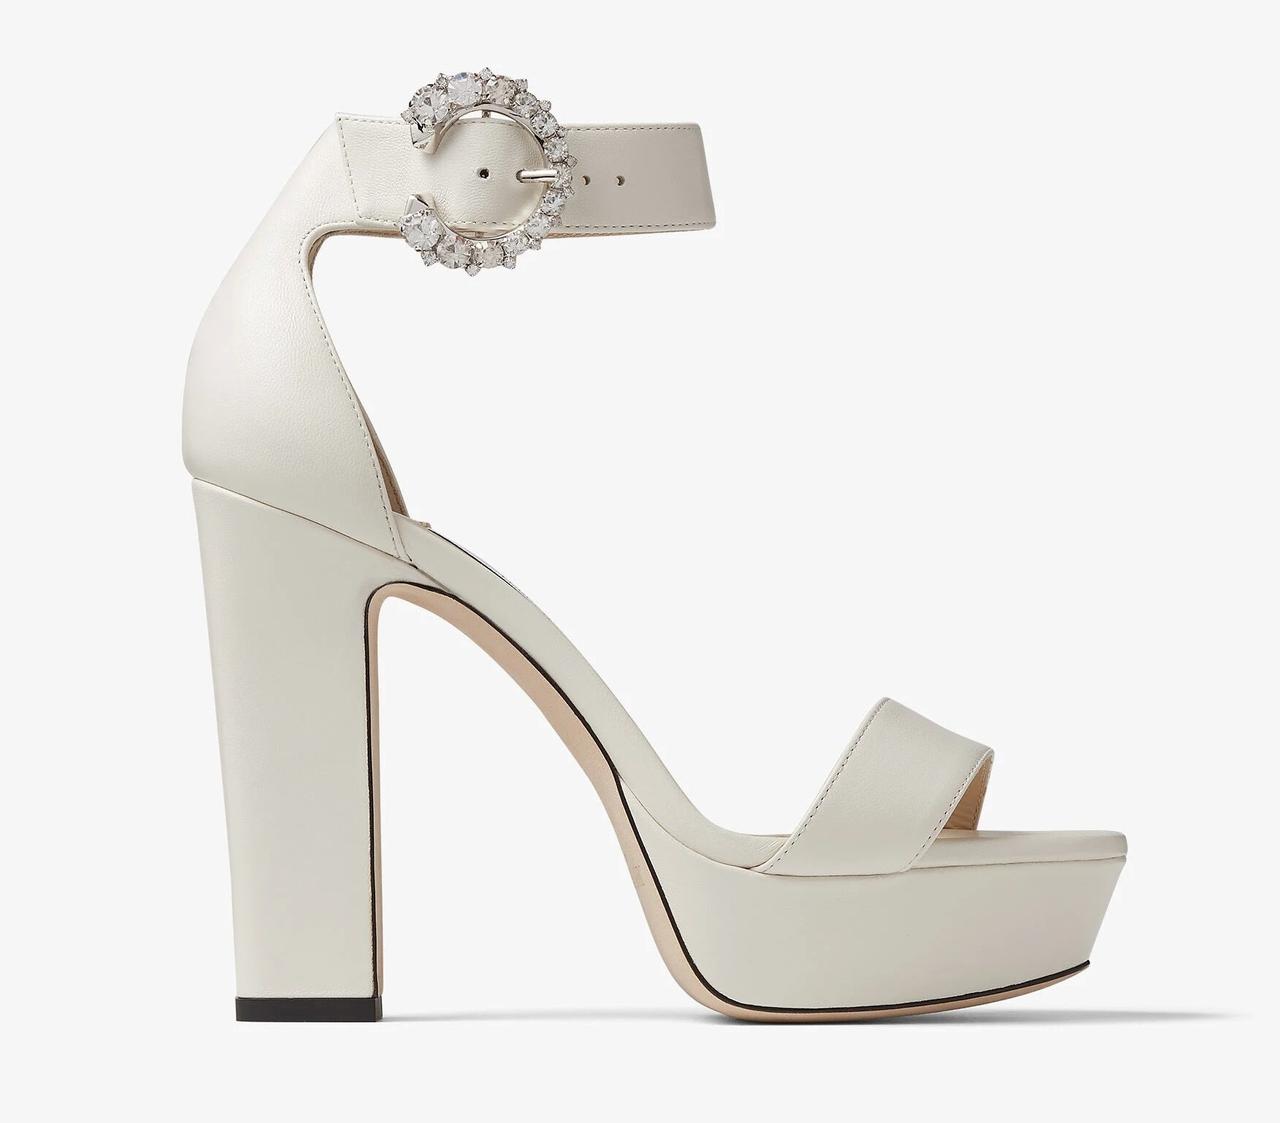 Comfortable Wedding Shoes UK: The Best Styles & Where to Buy Them -  hitched.co.uk